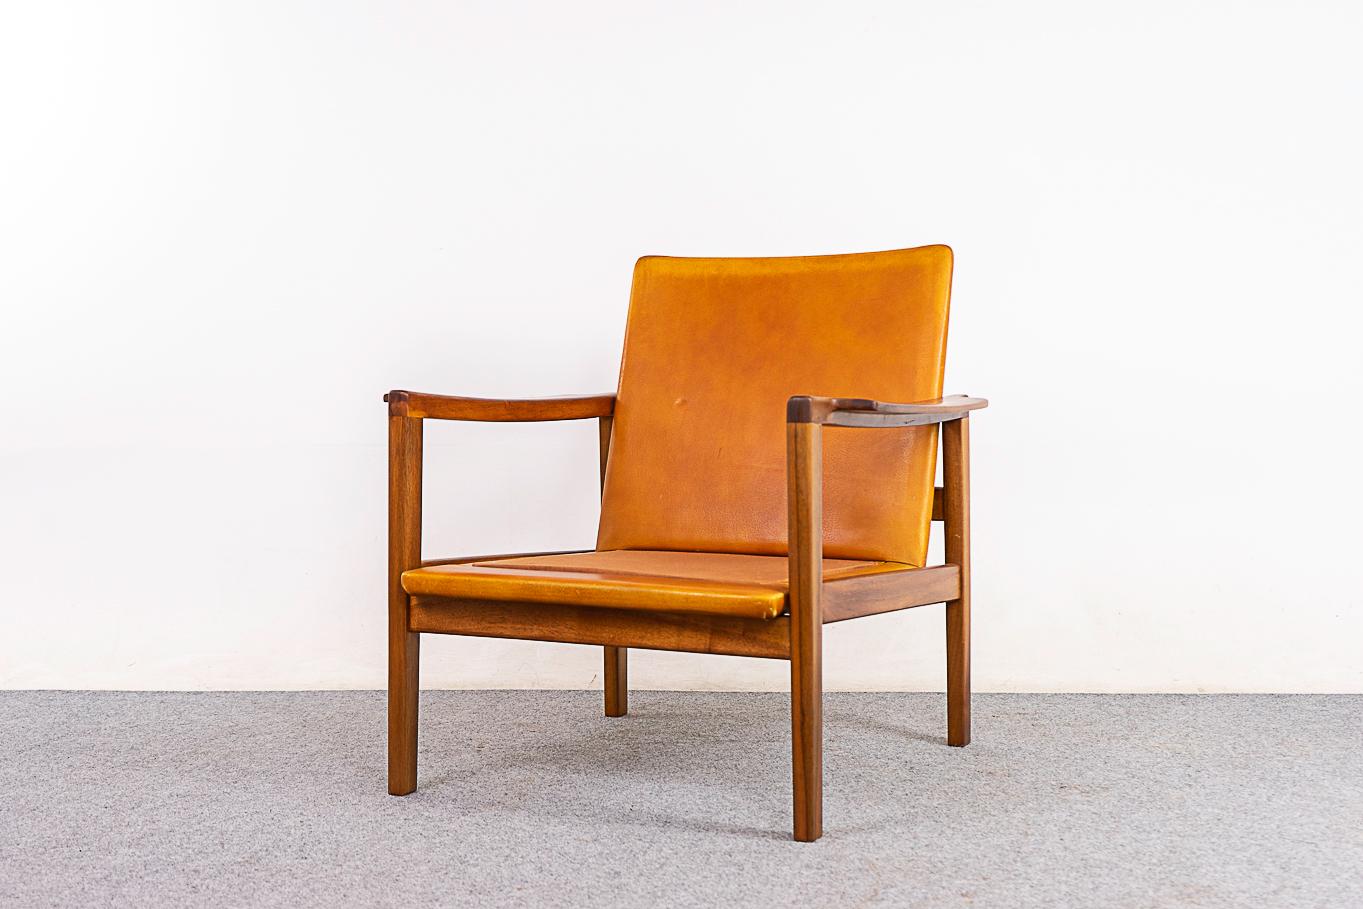 Walnut Danish lounge chair, circa 1960's. Beautifully sculpted frame with smooth joinery and a stunning silhouette. Solid wood frame and leather have been refinished. Seat & back cushions not included, customize upholstery on your end to suit the